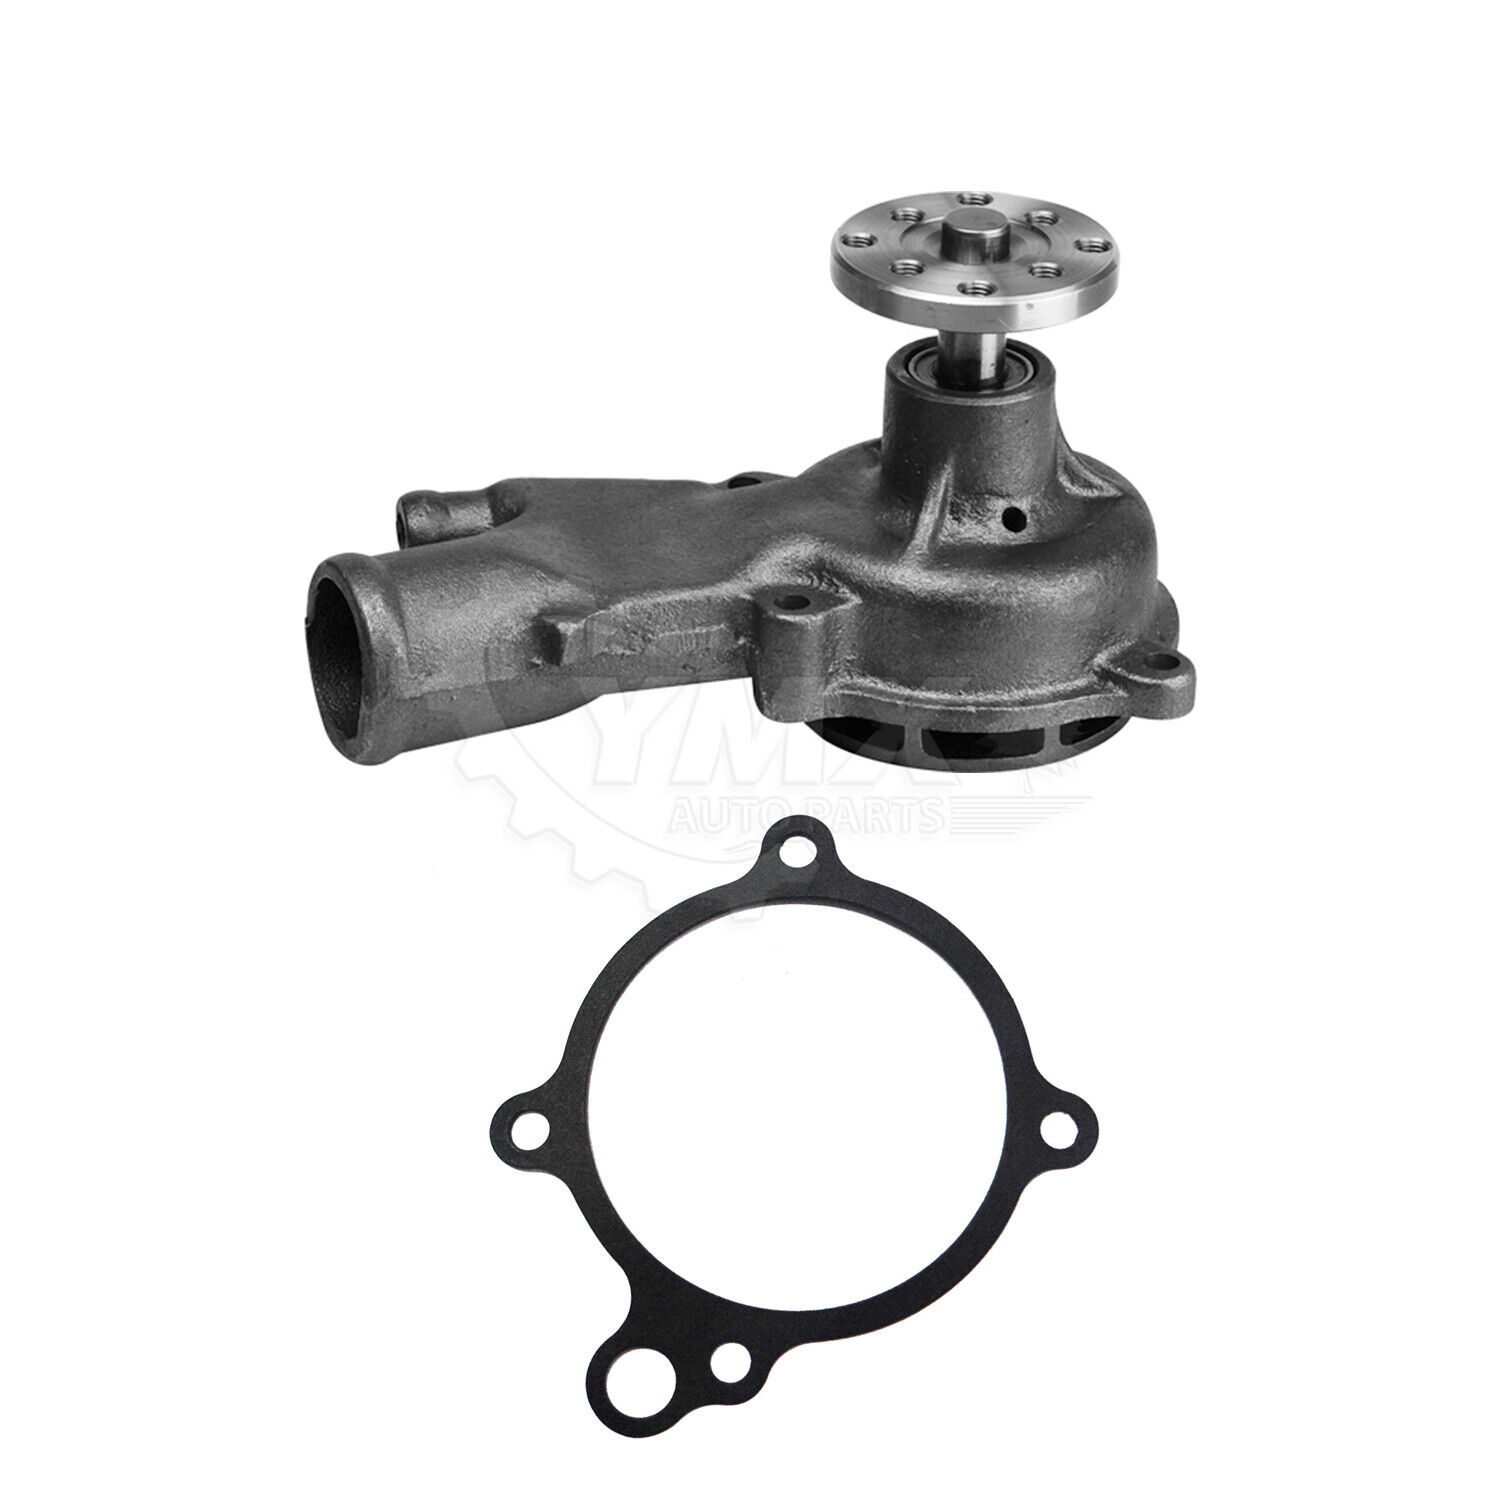 Water Pump w/ Gasket For Chevy Malibu Buick Apollo 4.1L OHV 130-1010 AW895